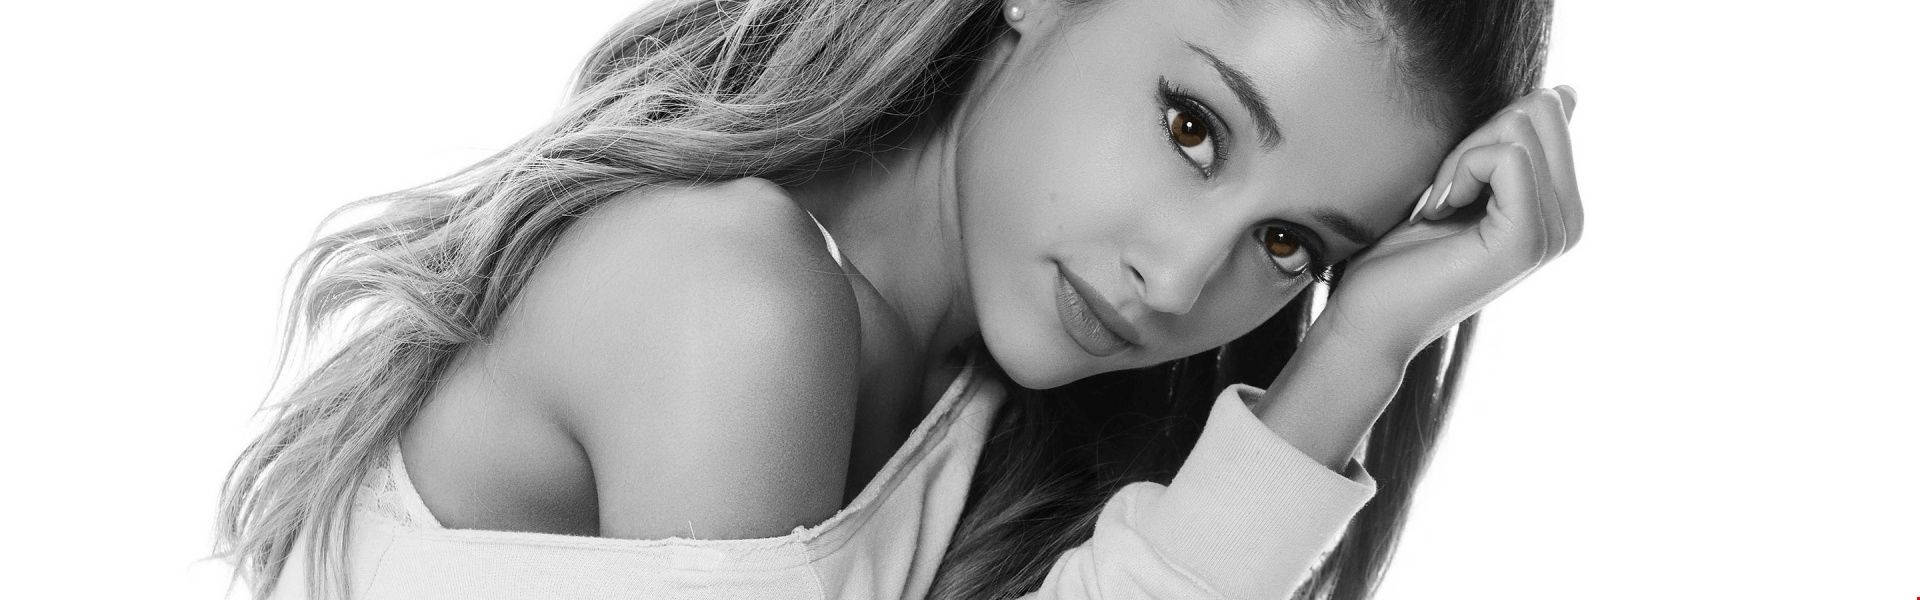 Ariana Grande 1920X600 Wallpaper and Background Image